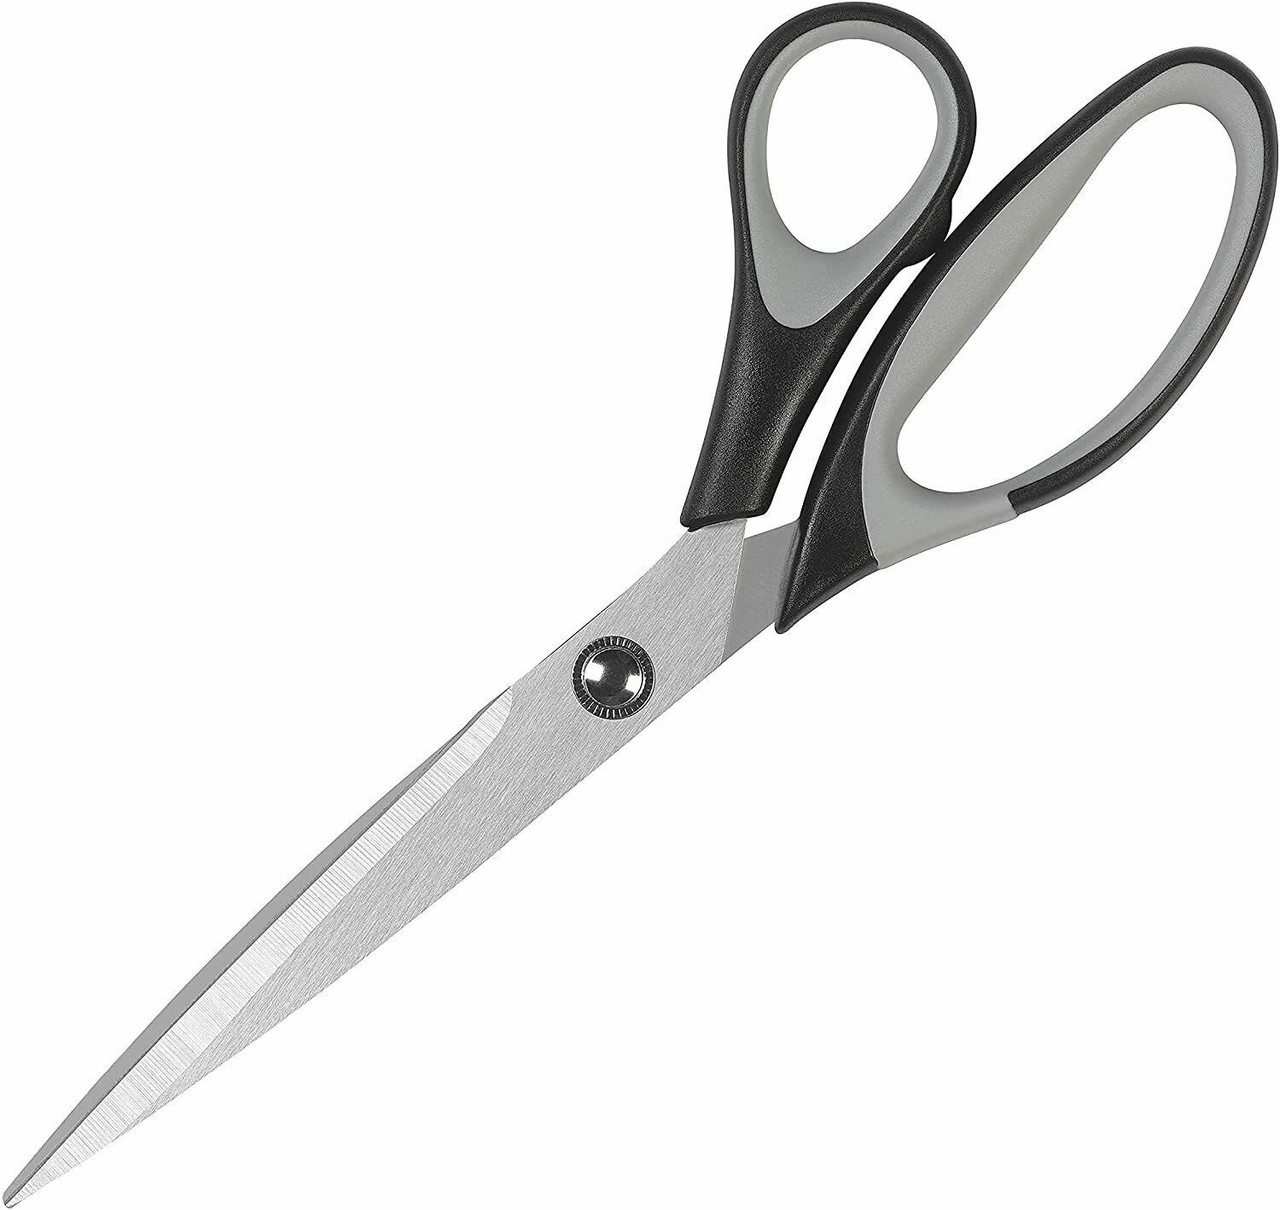 UTILITY KITCHEN SCISSORS 21CM WITH STAINLESS STEEL BLADE  2CR13 & PP